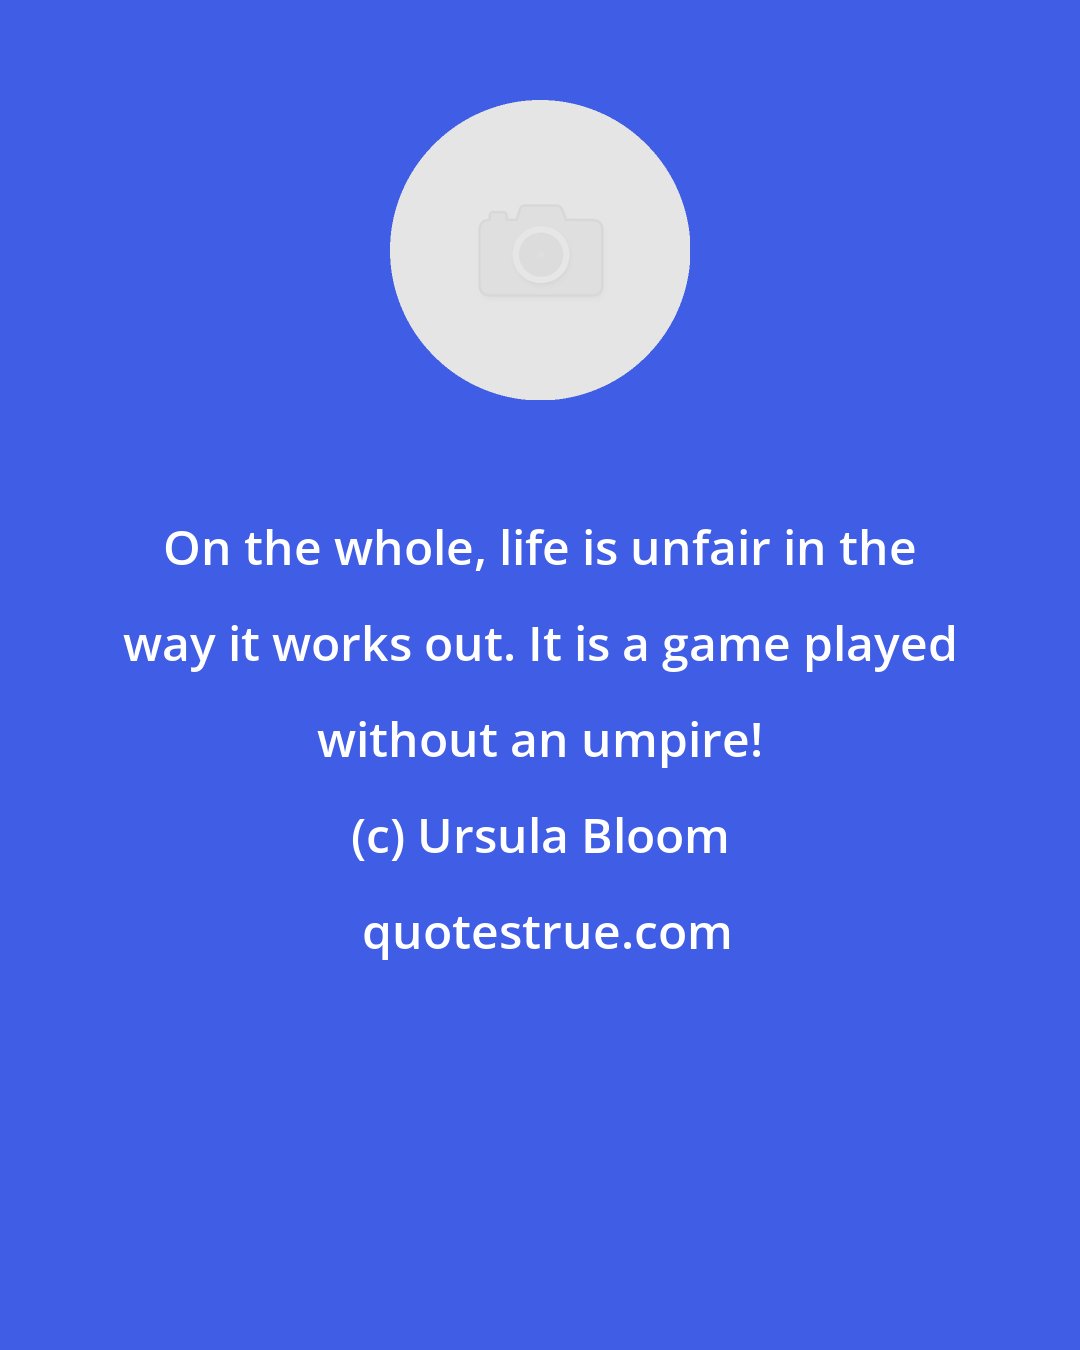 Ursula Bloom: On the whole, life is unfair in the way it works out. It is a game played without an umpire!